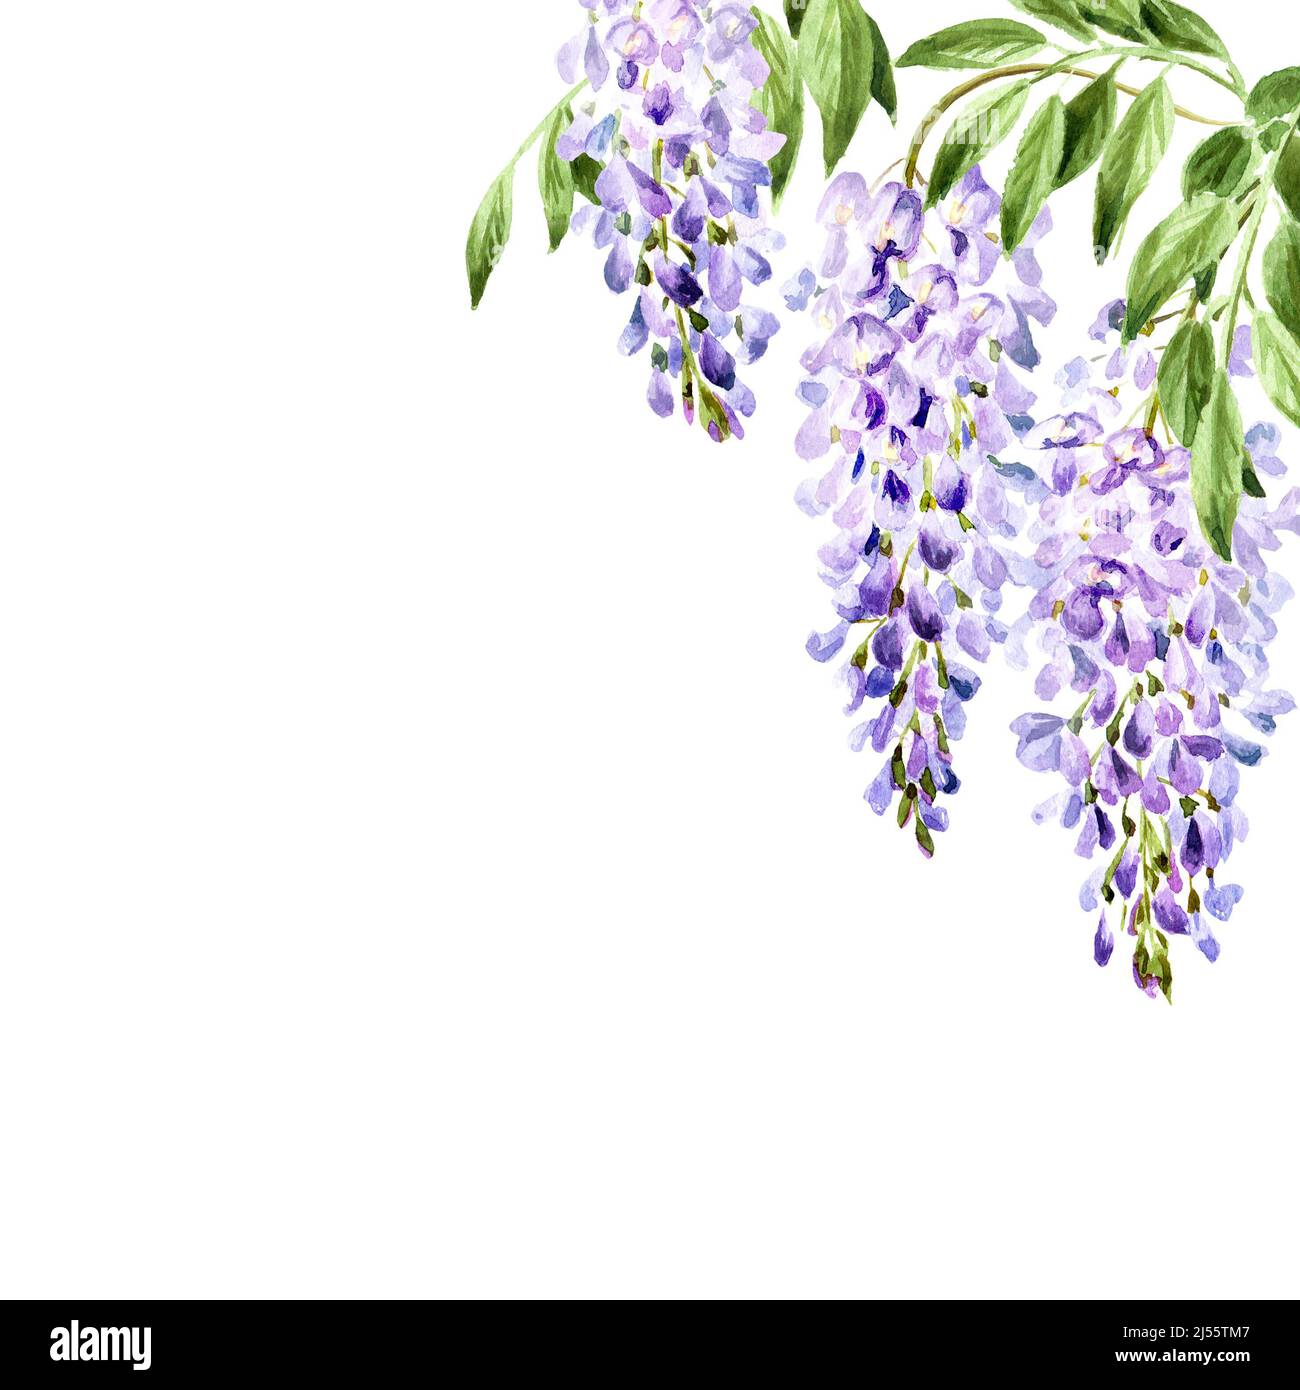 Wisteria flower border,   card.  Hand drawn watercolor  illustration isolated on white background Stock Photo